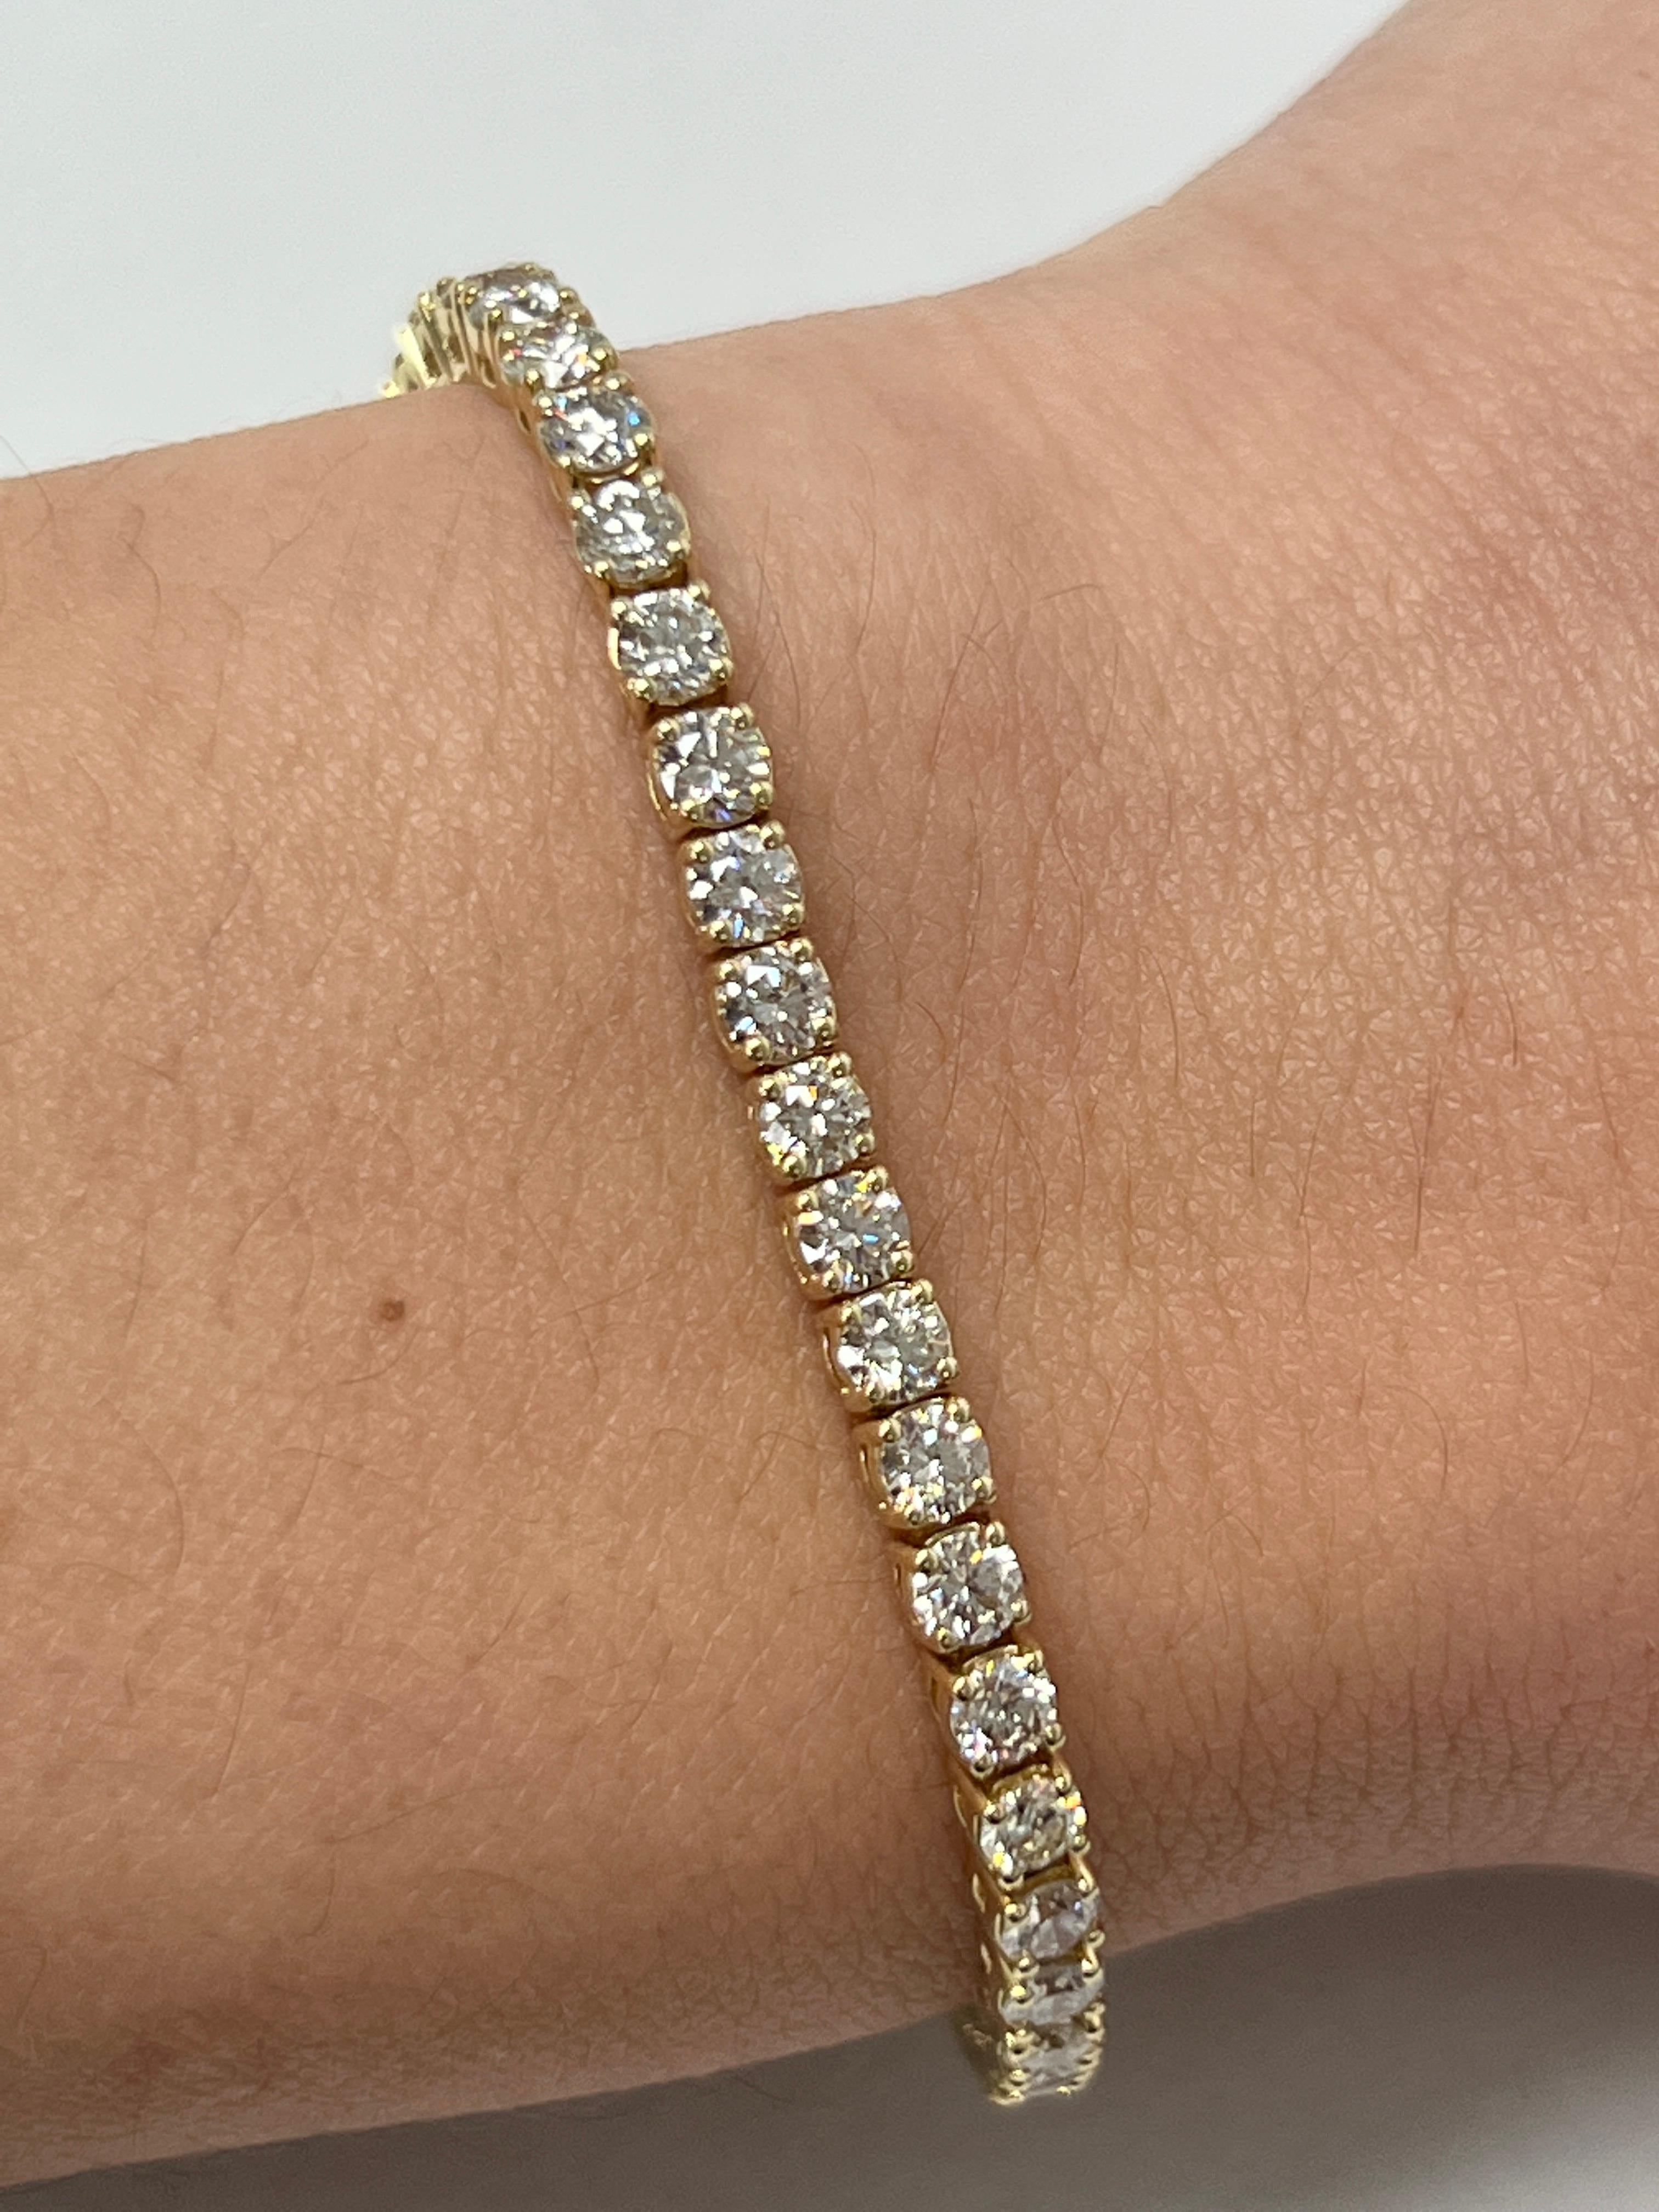 Fashion and glam are at the forefront with this exquisite diamond bracelet. This 18-karat yellow gold diamond bracelet is made from 11.7 grams of gold. The top is adorned with one row of I-J color, VS/SI clarity diamonds. This bracelet carries 51